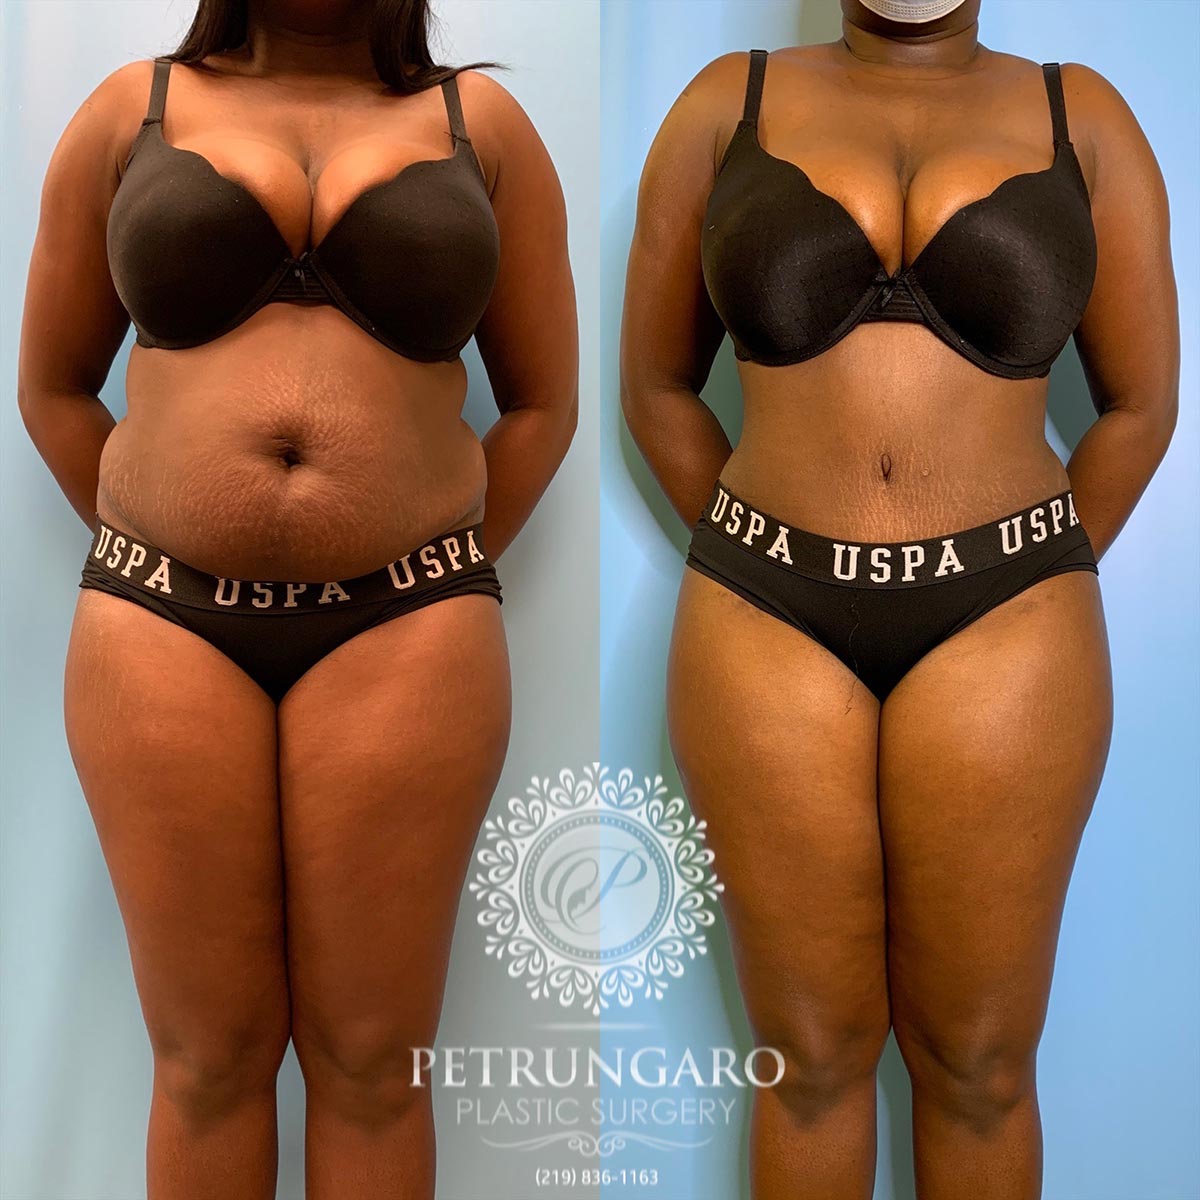 34 female 5 months after Lipo 360